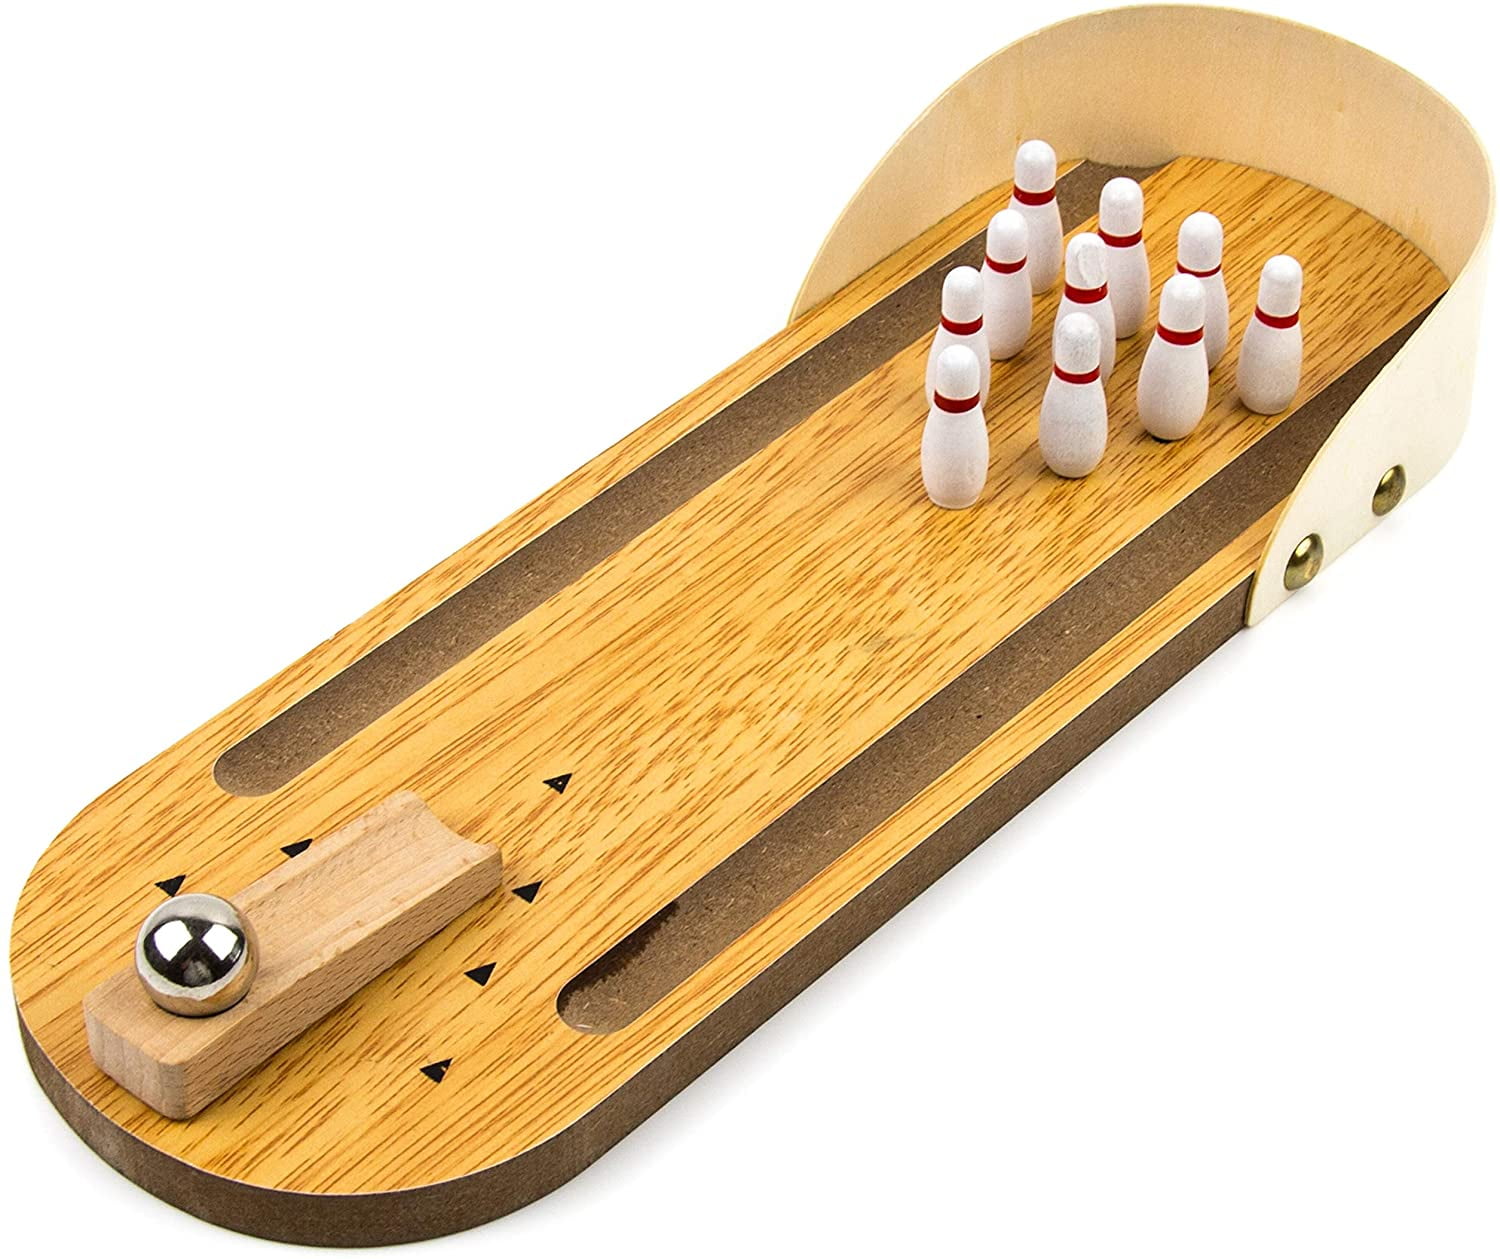 Bowling Its Way More Fun Than it Looks Quick and Easy to Set-Up and So Compact for Storage or as a Travel Game Oyria Shooting Game Tabletop Games for Families